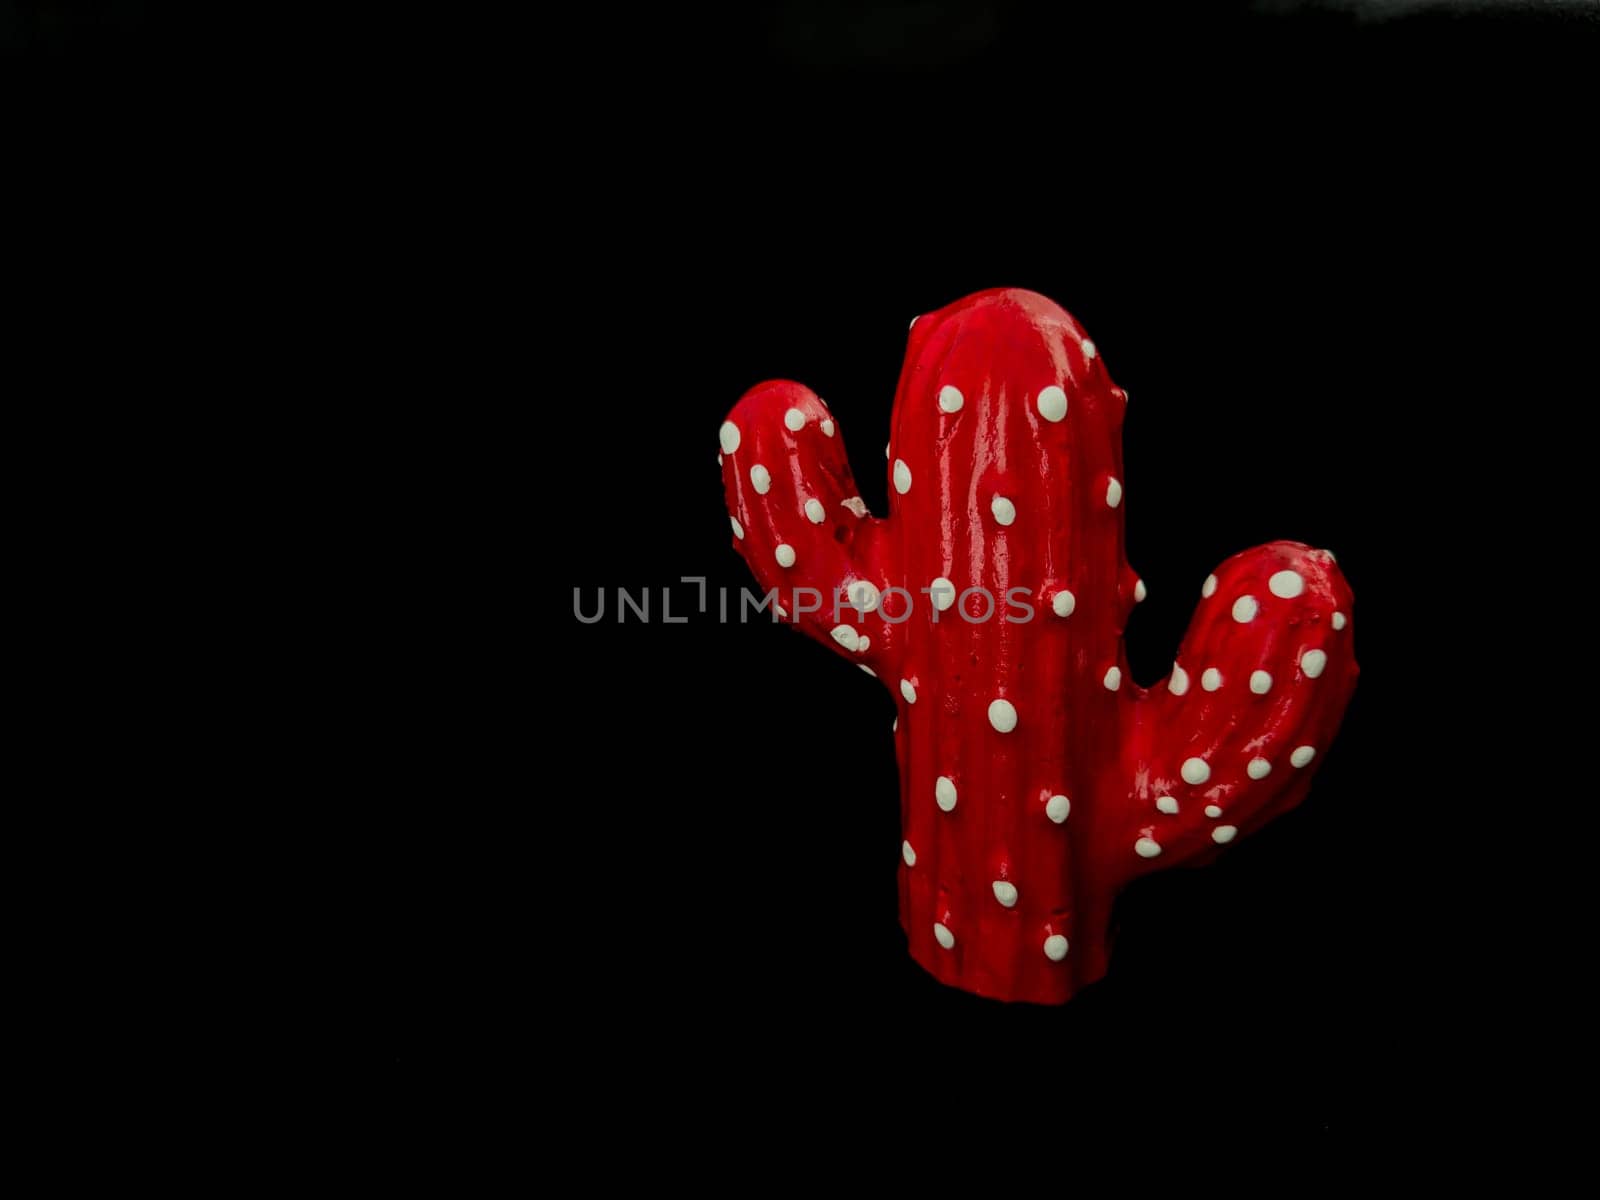 Red cactus on a black background by voktybre